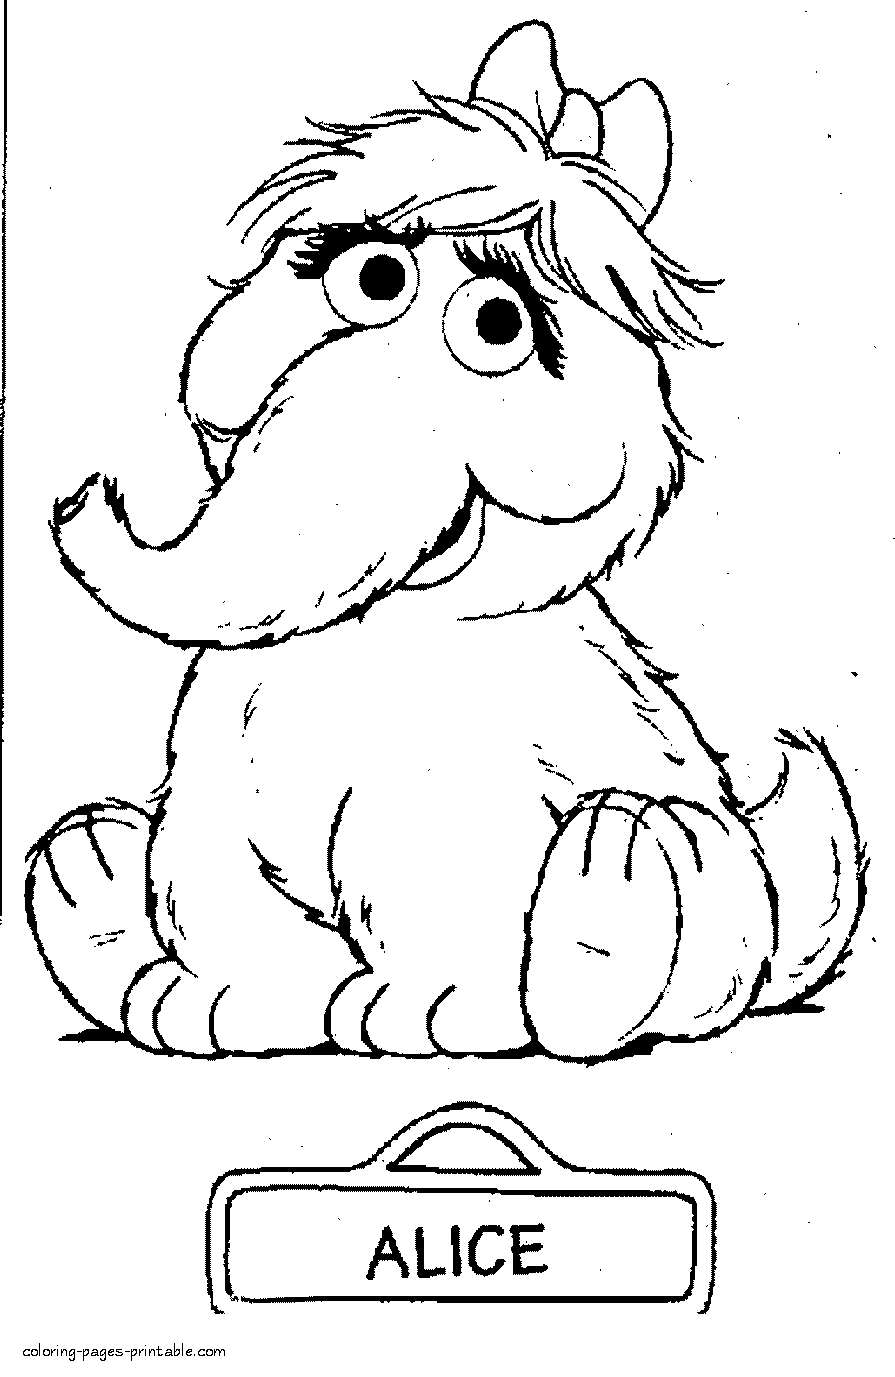 Alice Sesame Street heroes coloring pages for free